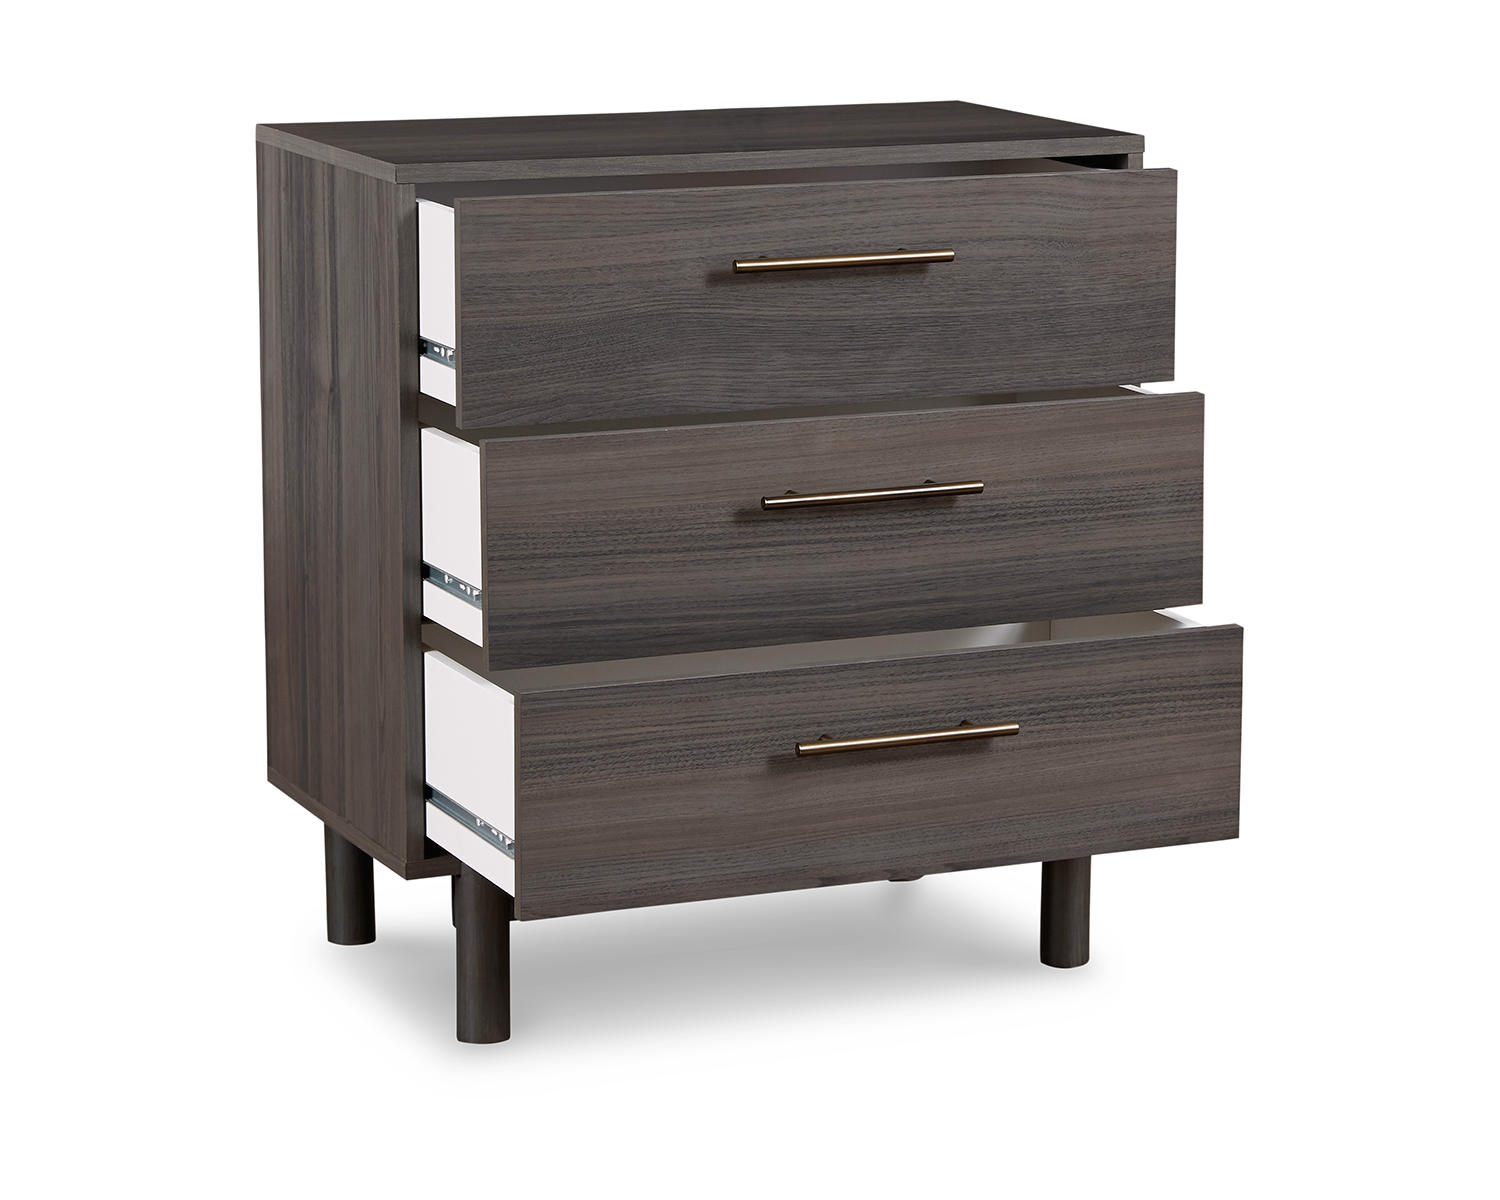 Signature Design by Ashley Brymont Mid-Century Modern 3 Drawer Chest of Drawers, Dark Gray - image 3 of 6